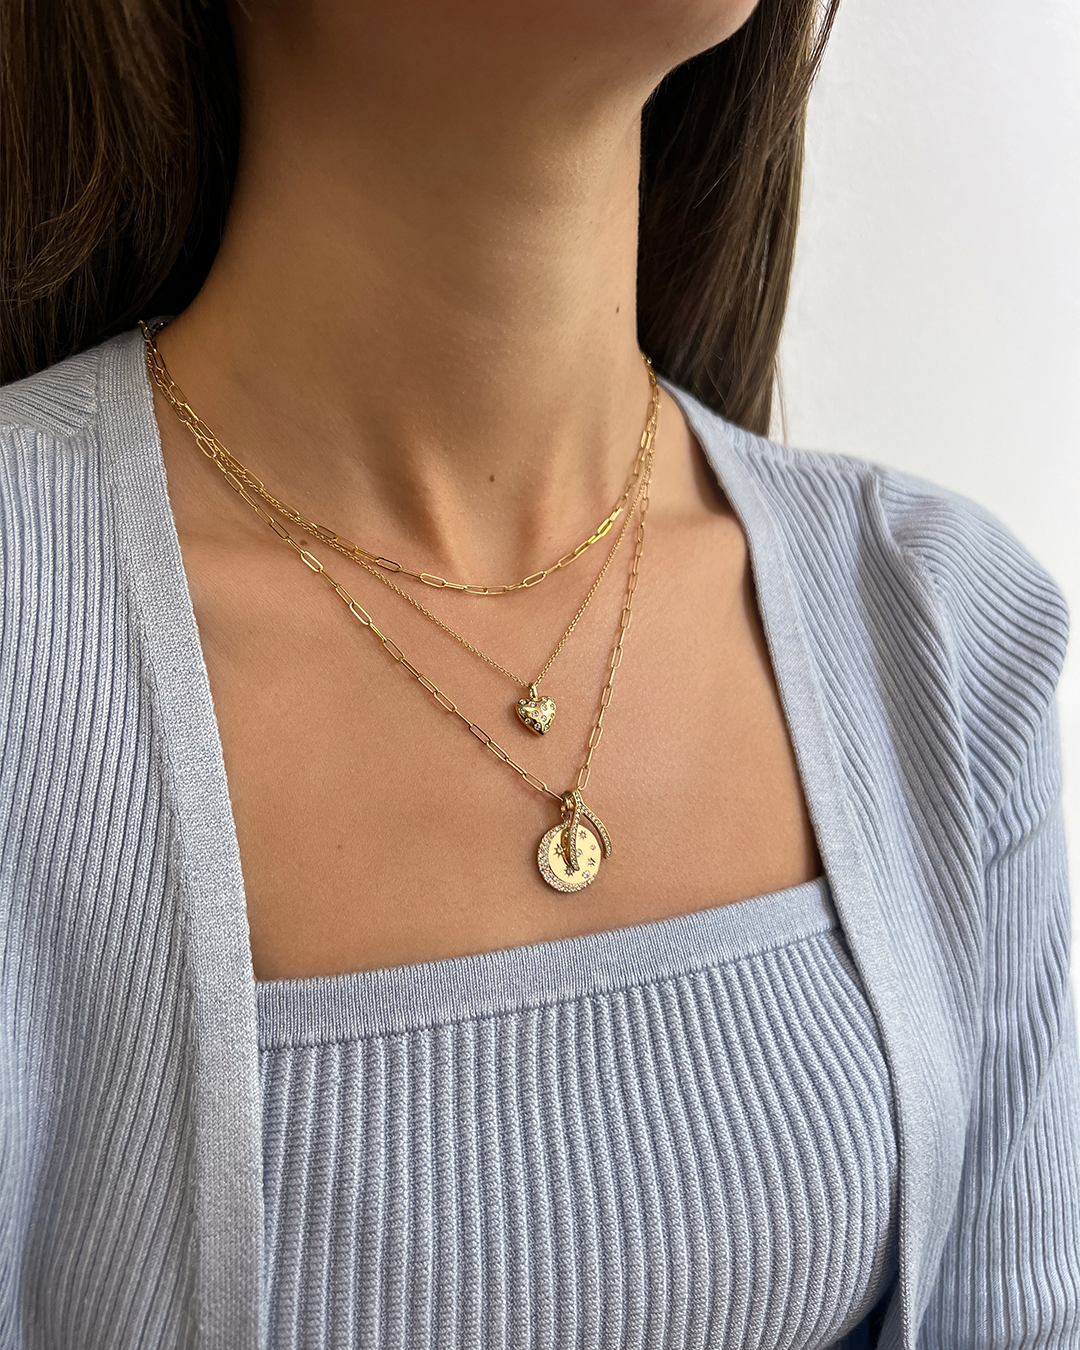 14k Gold and Diamond Domed Heart Necklace